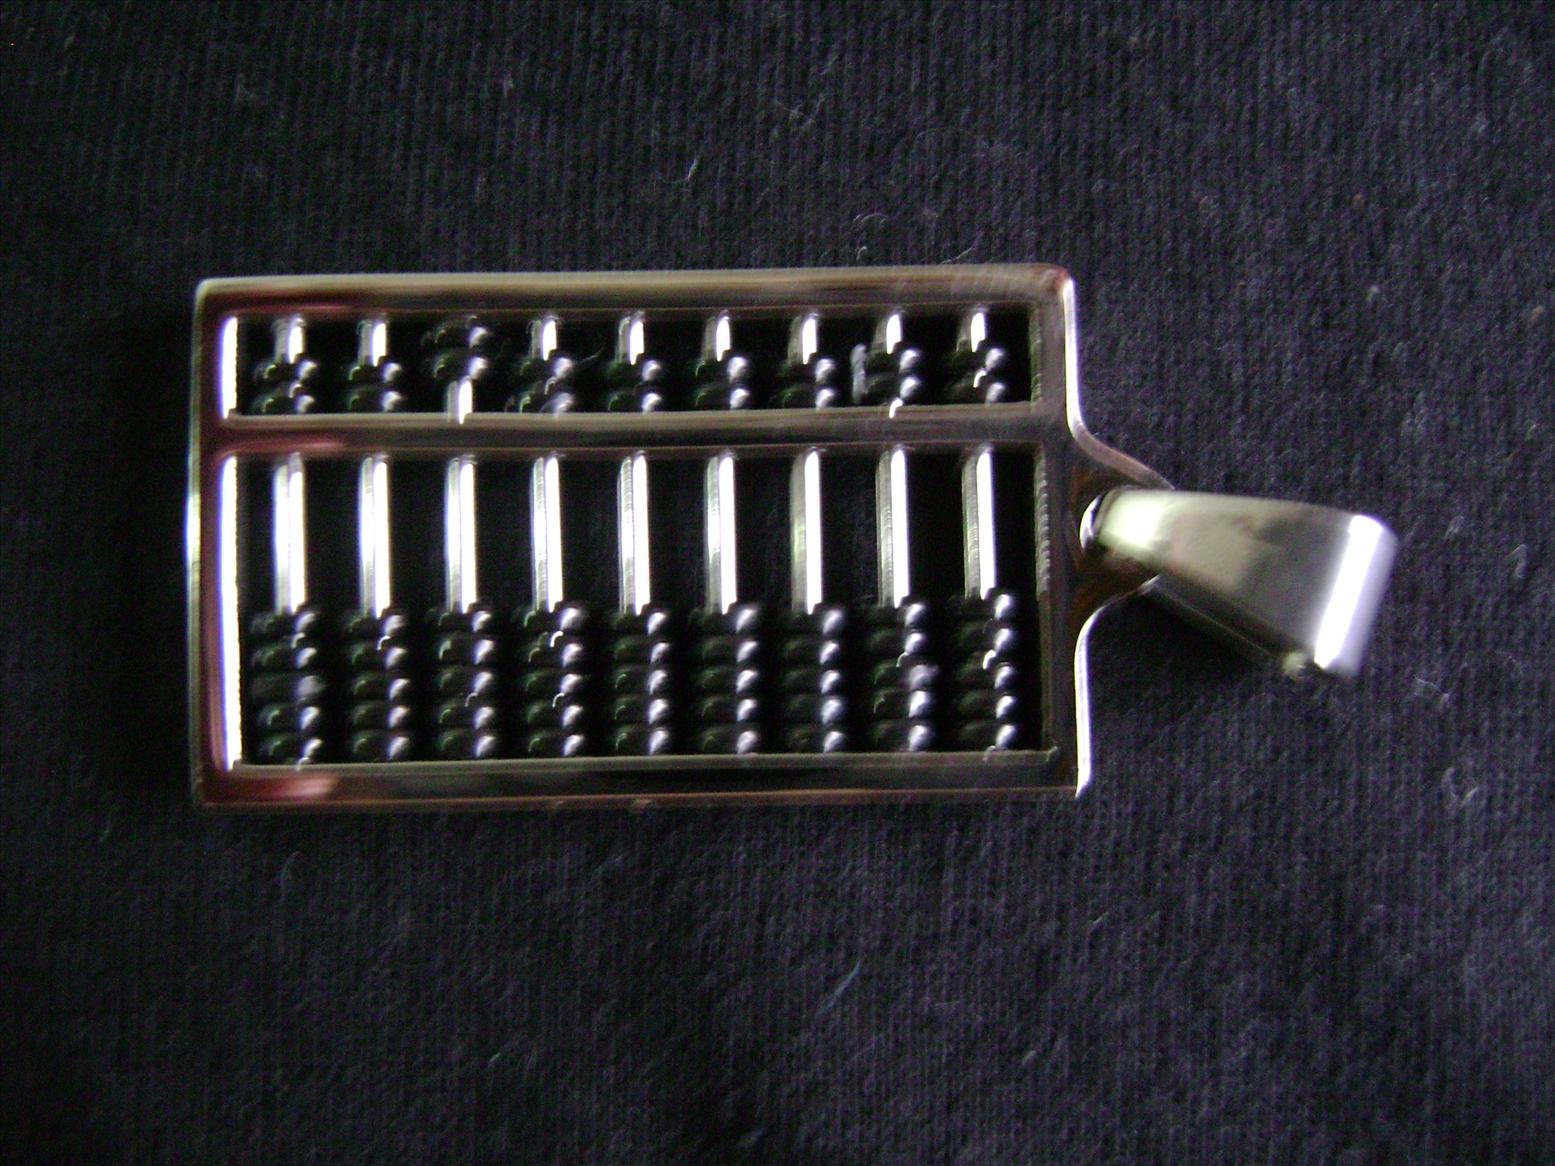 Abacus pendant, a fengshui symbol of prosperity